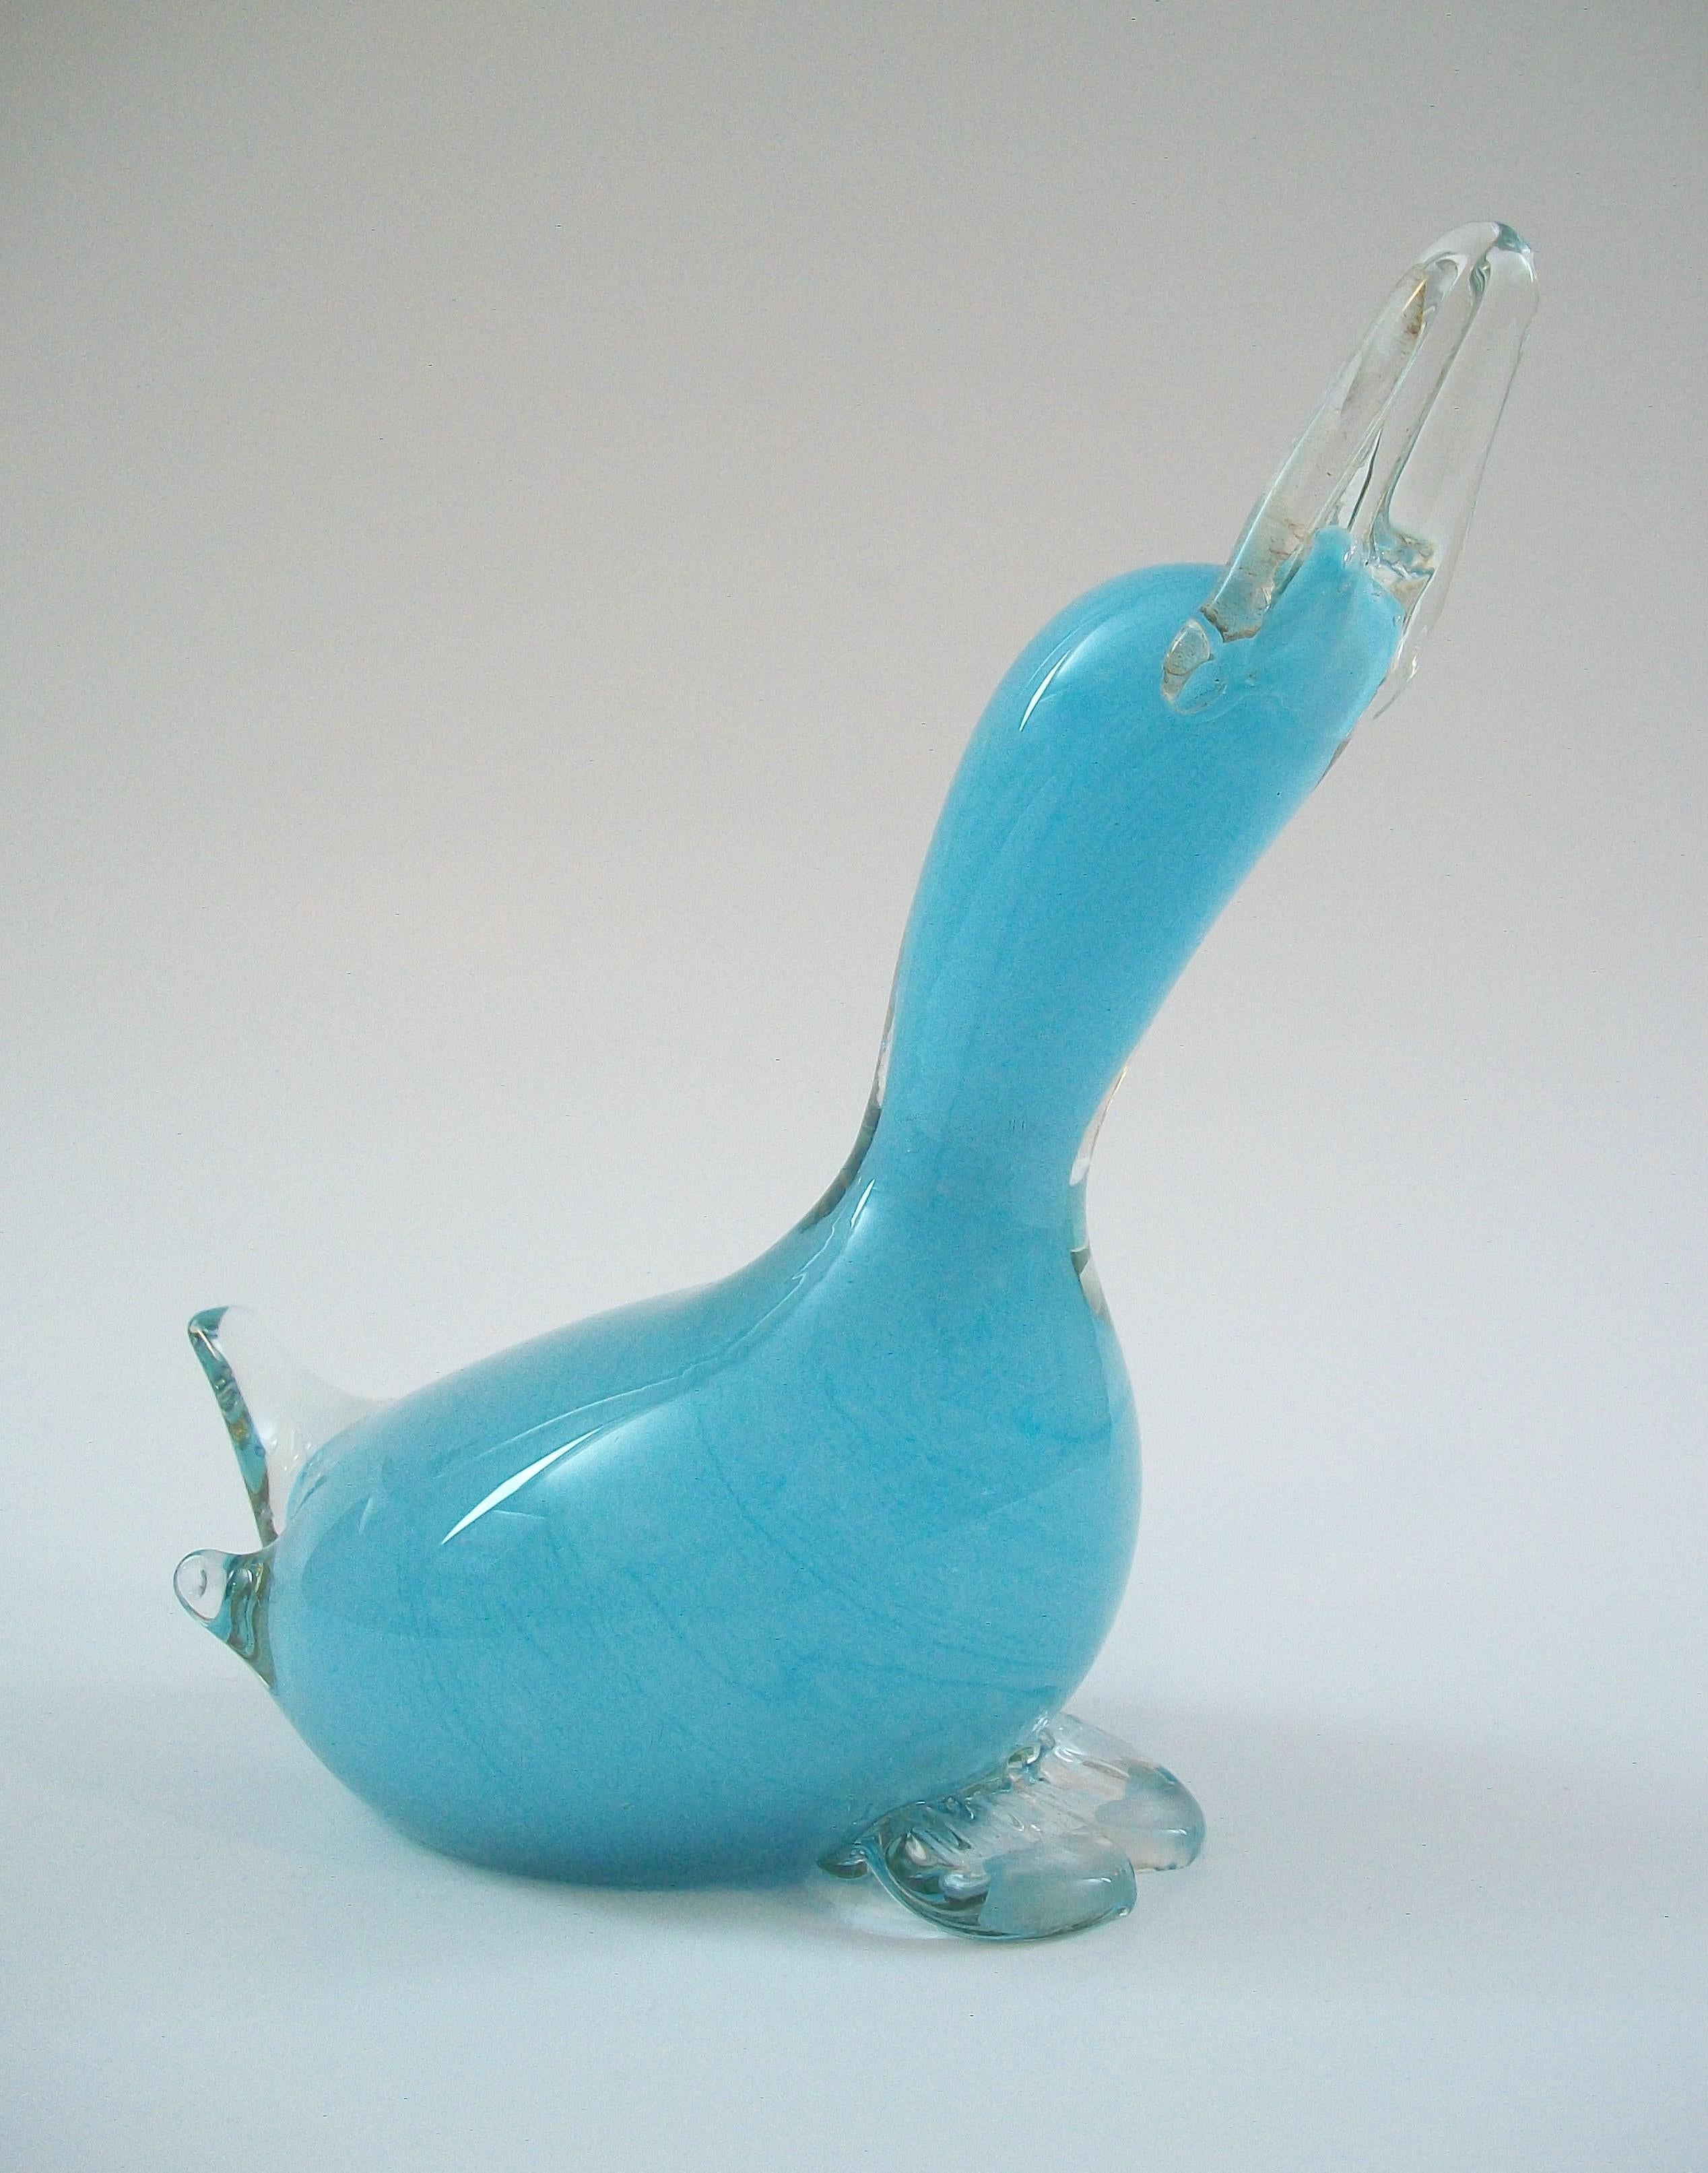 OY KUMELA (Manufacturer) - ARMANDO JACOBINO (Designer) - Mid Century studio glass duck figure - featuring cased and applied clear glass beak, tale and feet - striking turquoise blue color to the interior - signed on the base - Finland - circa